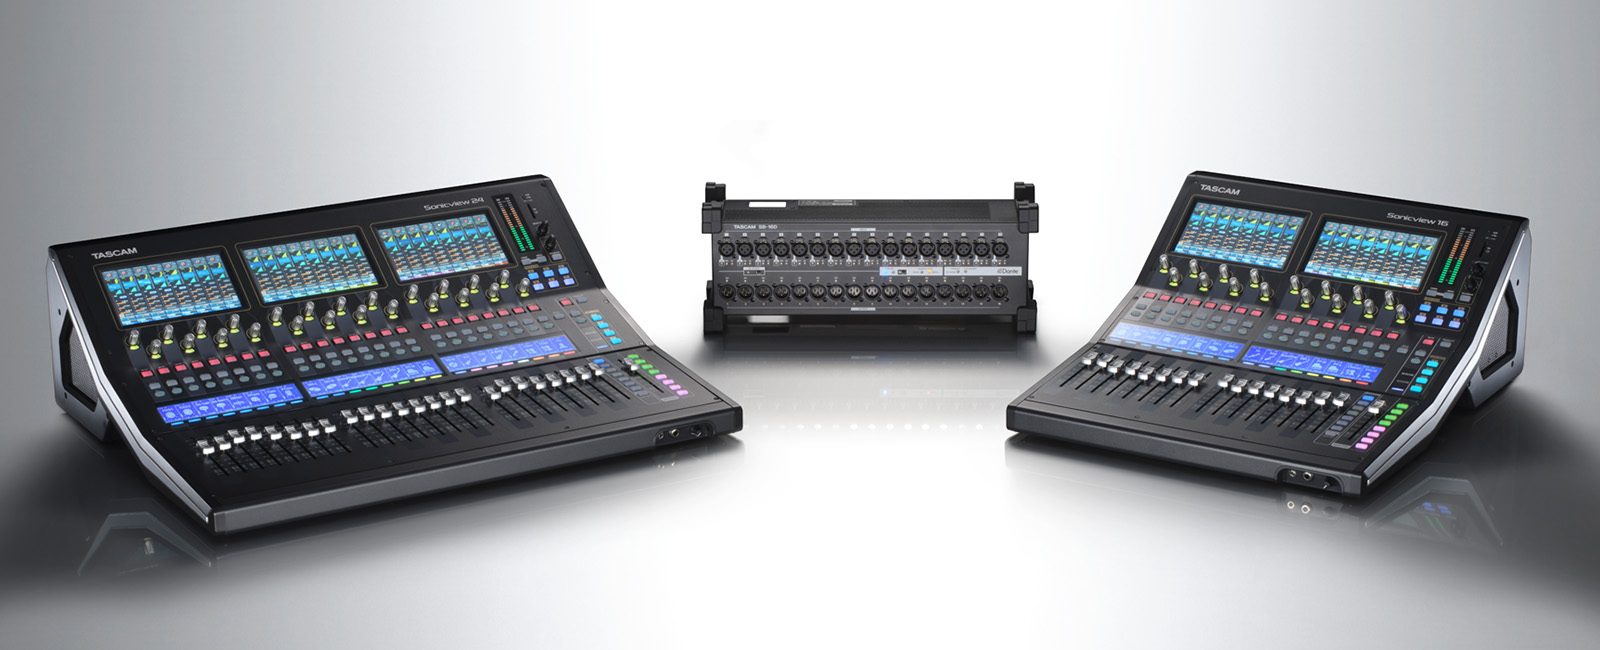 TASCAM Announces Version 1.4.1 Firmware Update  for the Sonicview 16/24 Digital Consoles